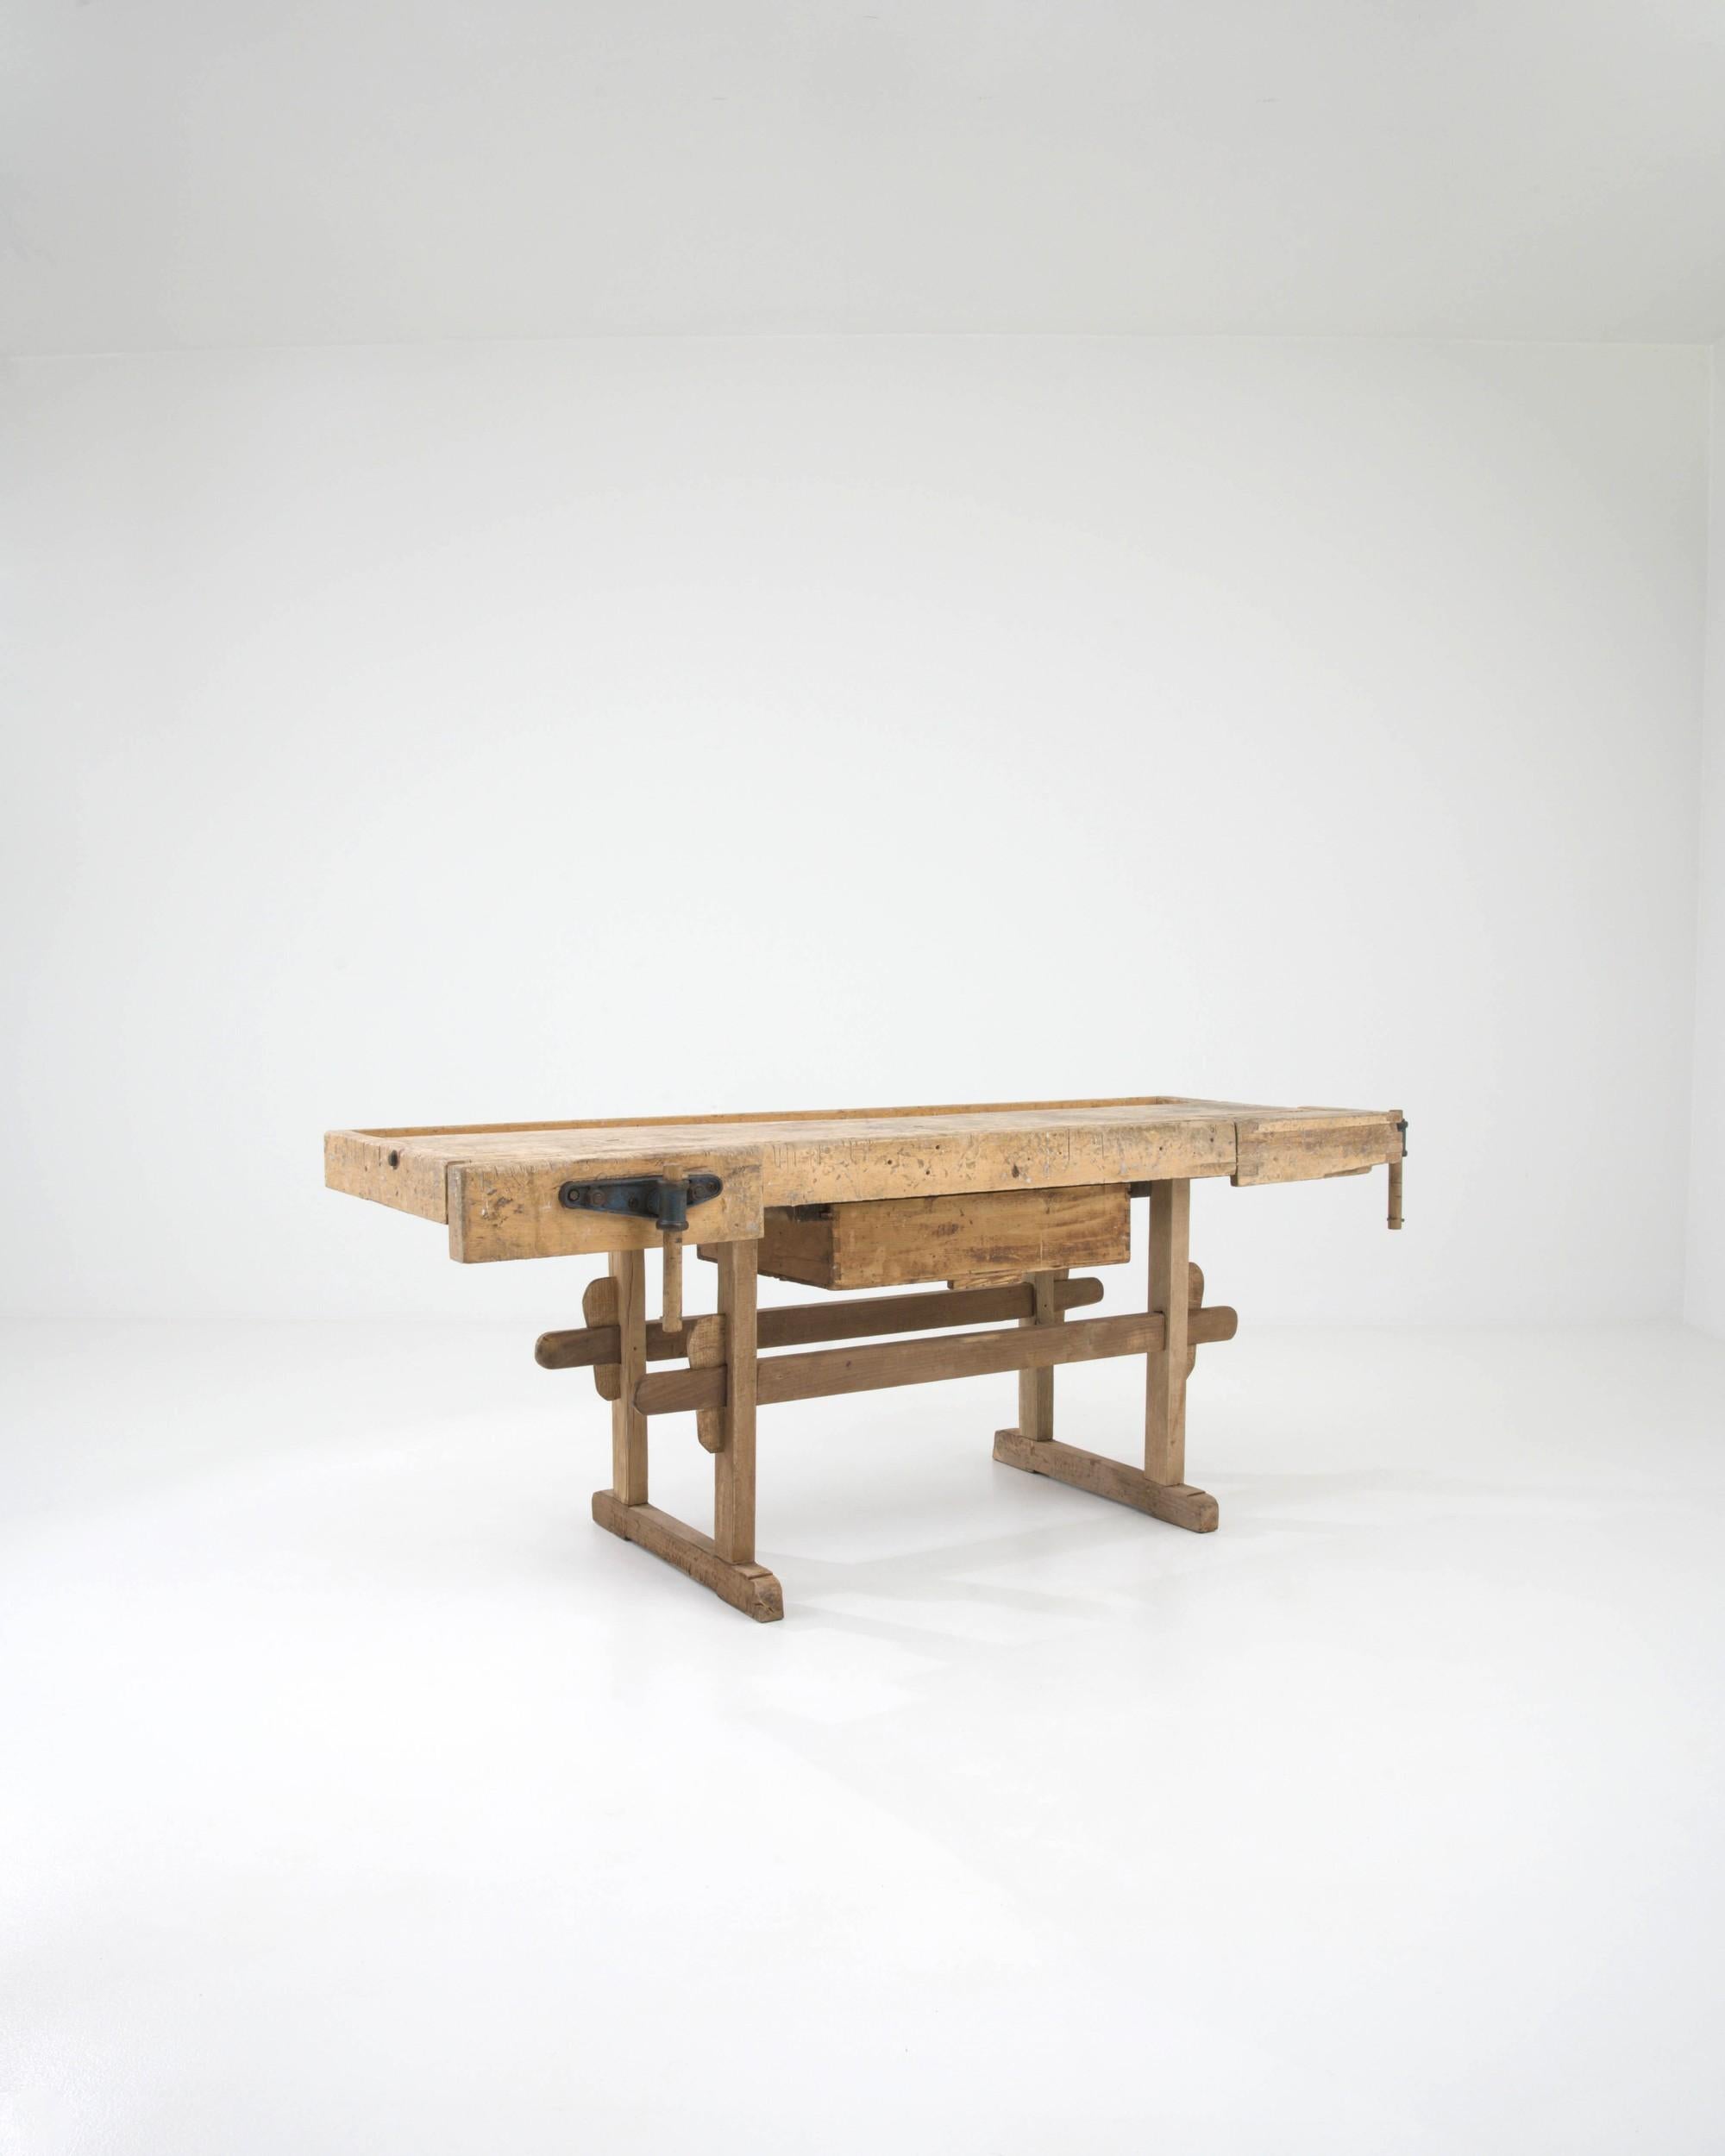 20th Century Central European Industrial Wooden Work Table For Sale 1